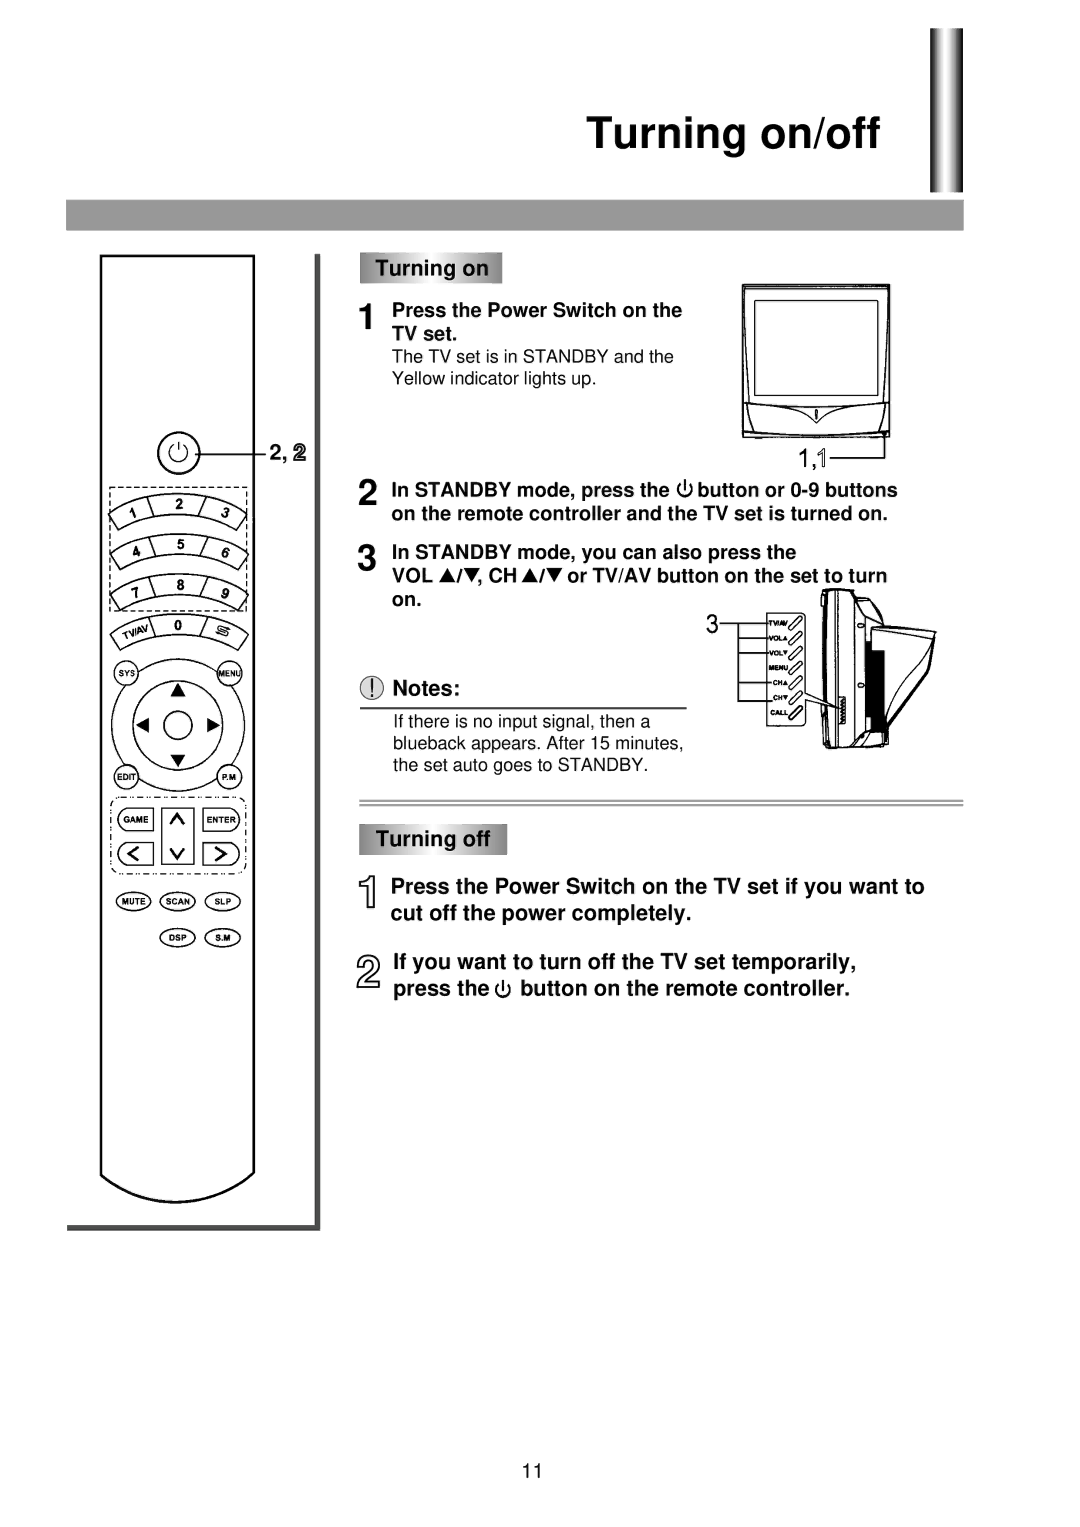 Palsonic 6825G owner manual Turning on/off, Press the Power Switch on the TV set 